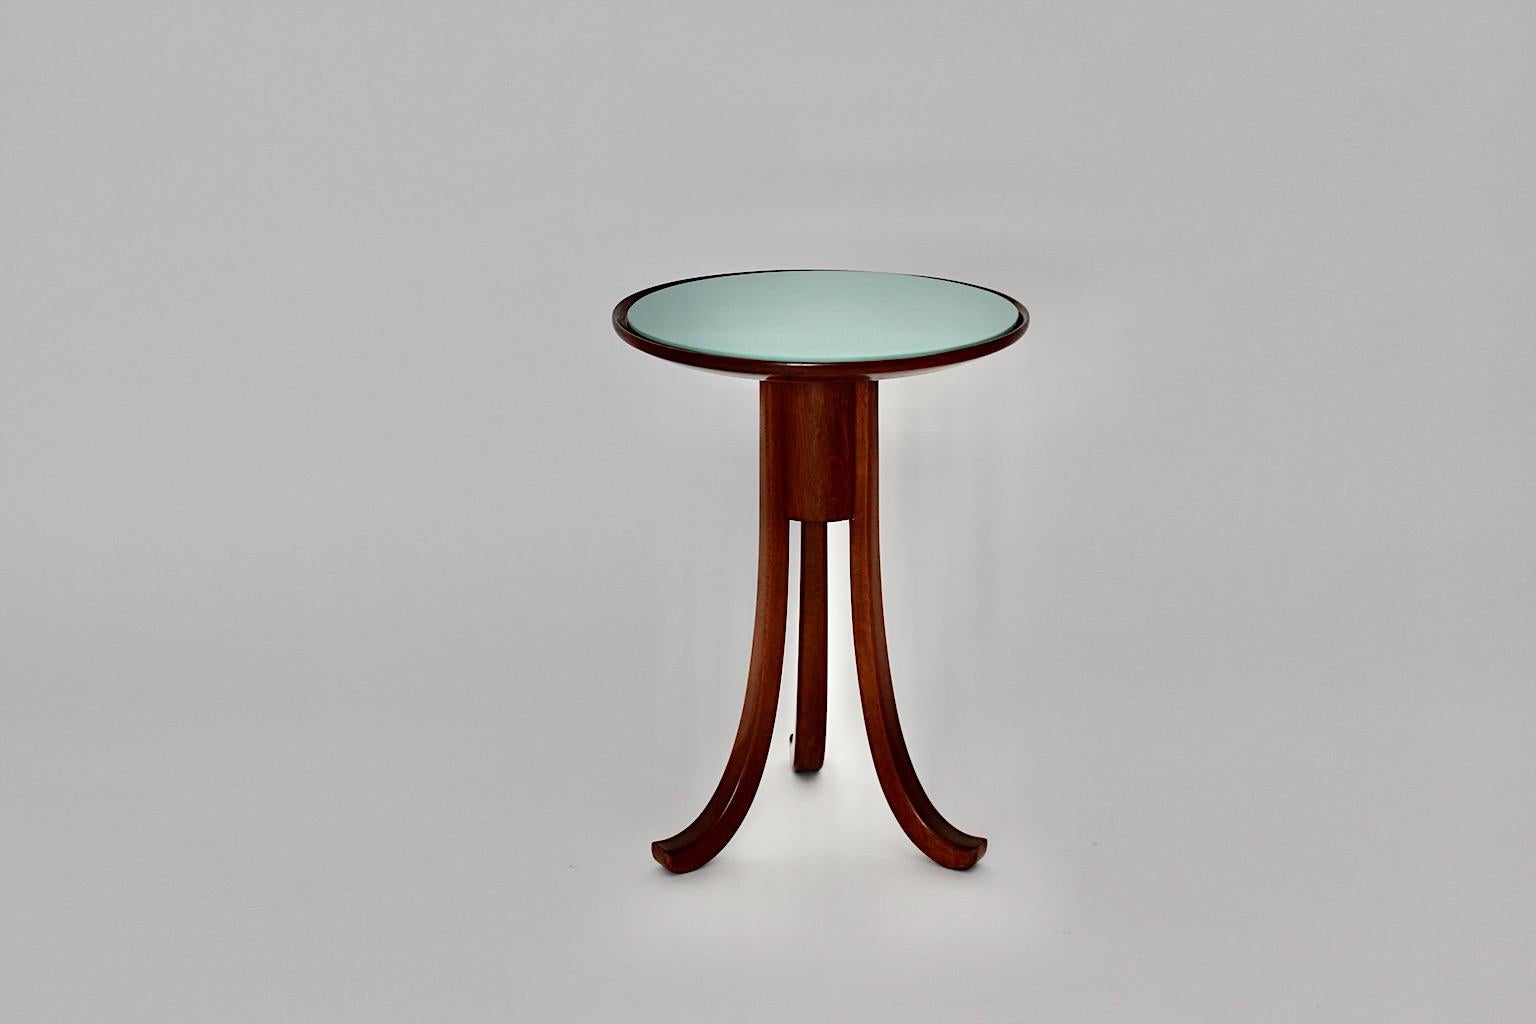 20th Century Art Deco Vintage Oak Green Glass Side Table attributed Josef Frank, 1930s Vienna For Sale